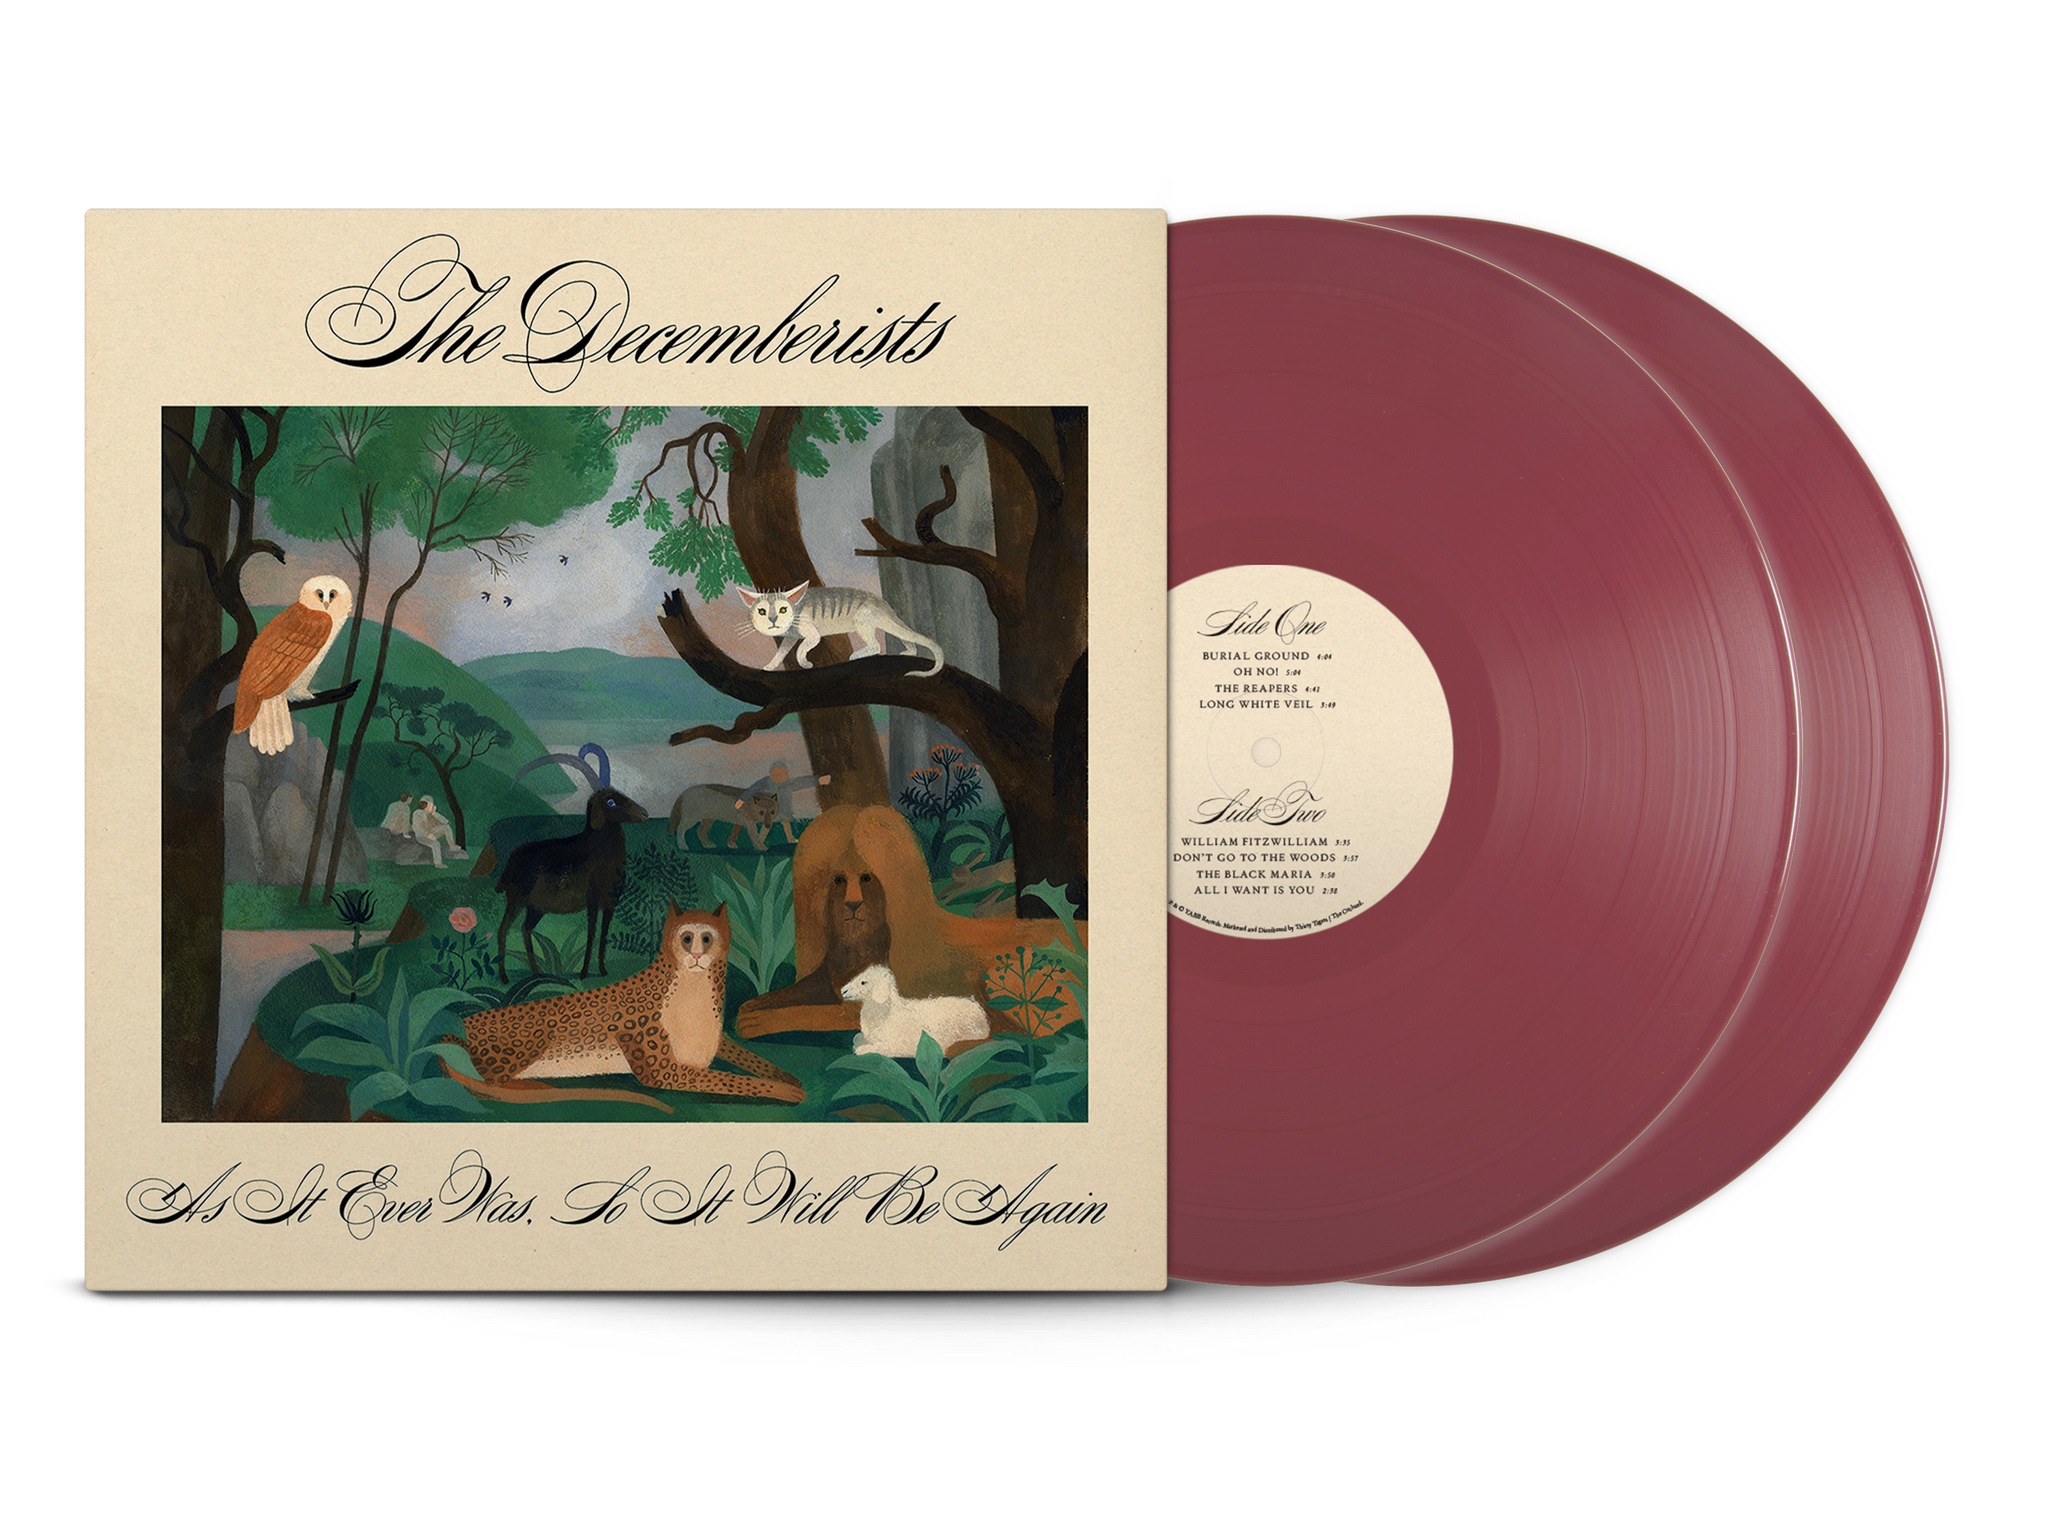 PRE-ORDER: THE DECEMBERISTS - AS IT EVER WAS, SO IT WILL BE AGAIN Vinyl 2xLP